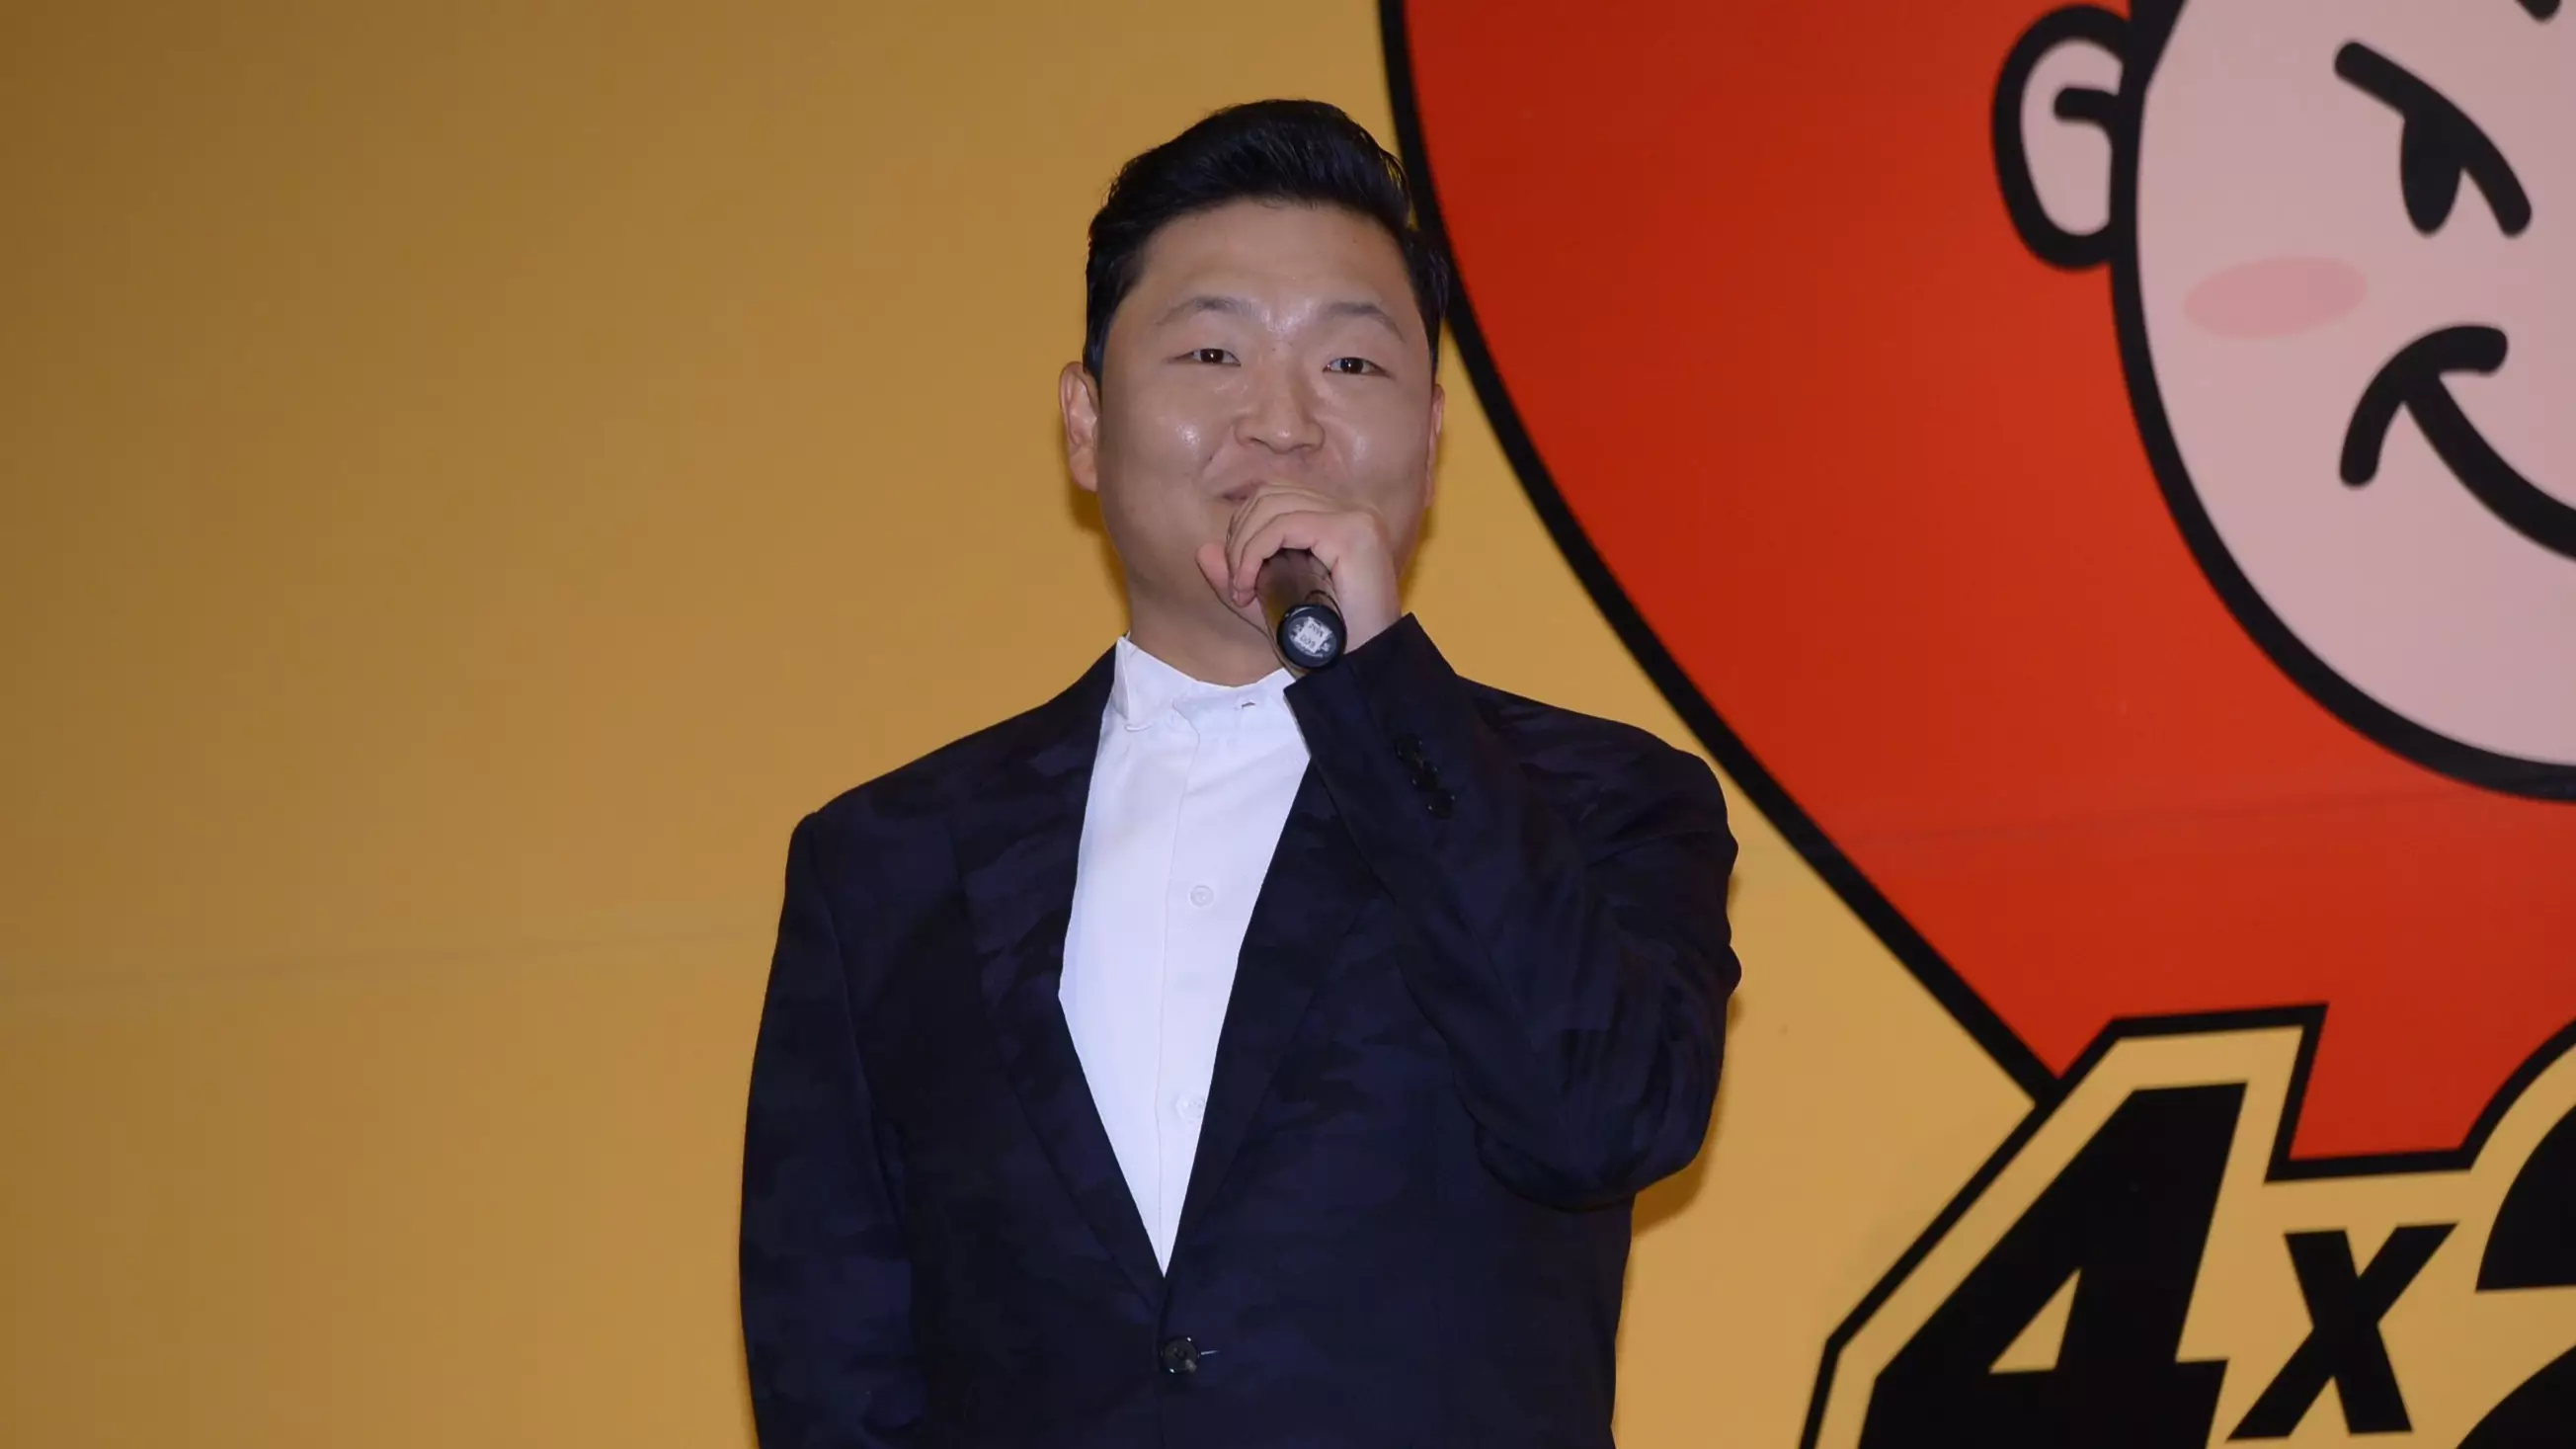 Psy Won’t Be A Part Of Massive Delegation To North Korea Because He’s Too ‘Provocative’ 